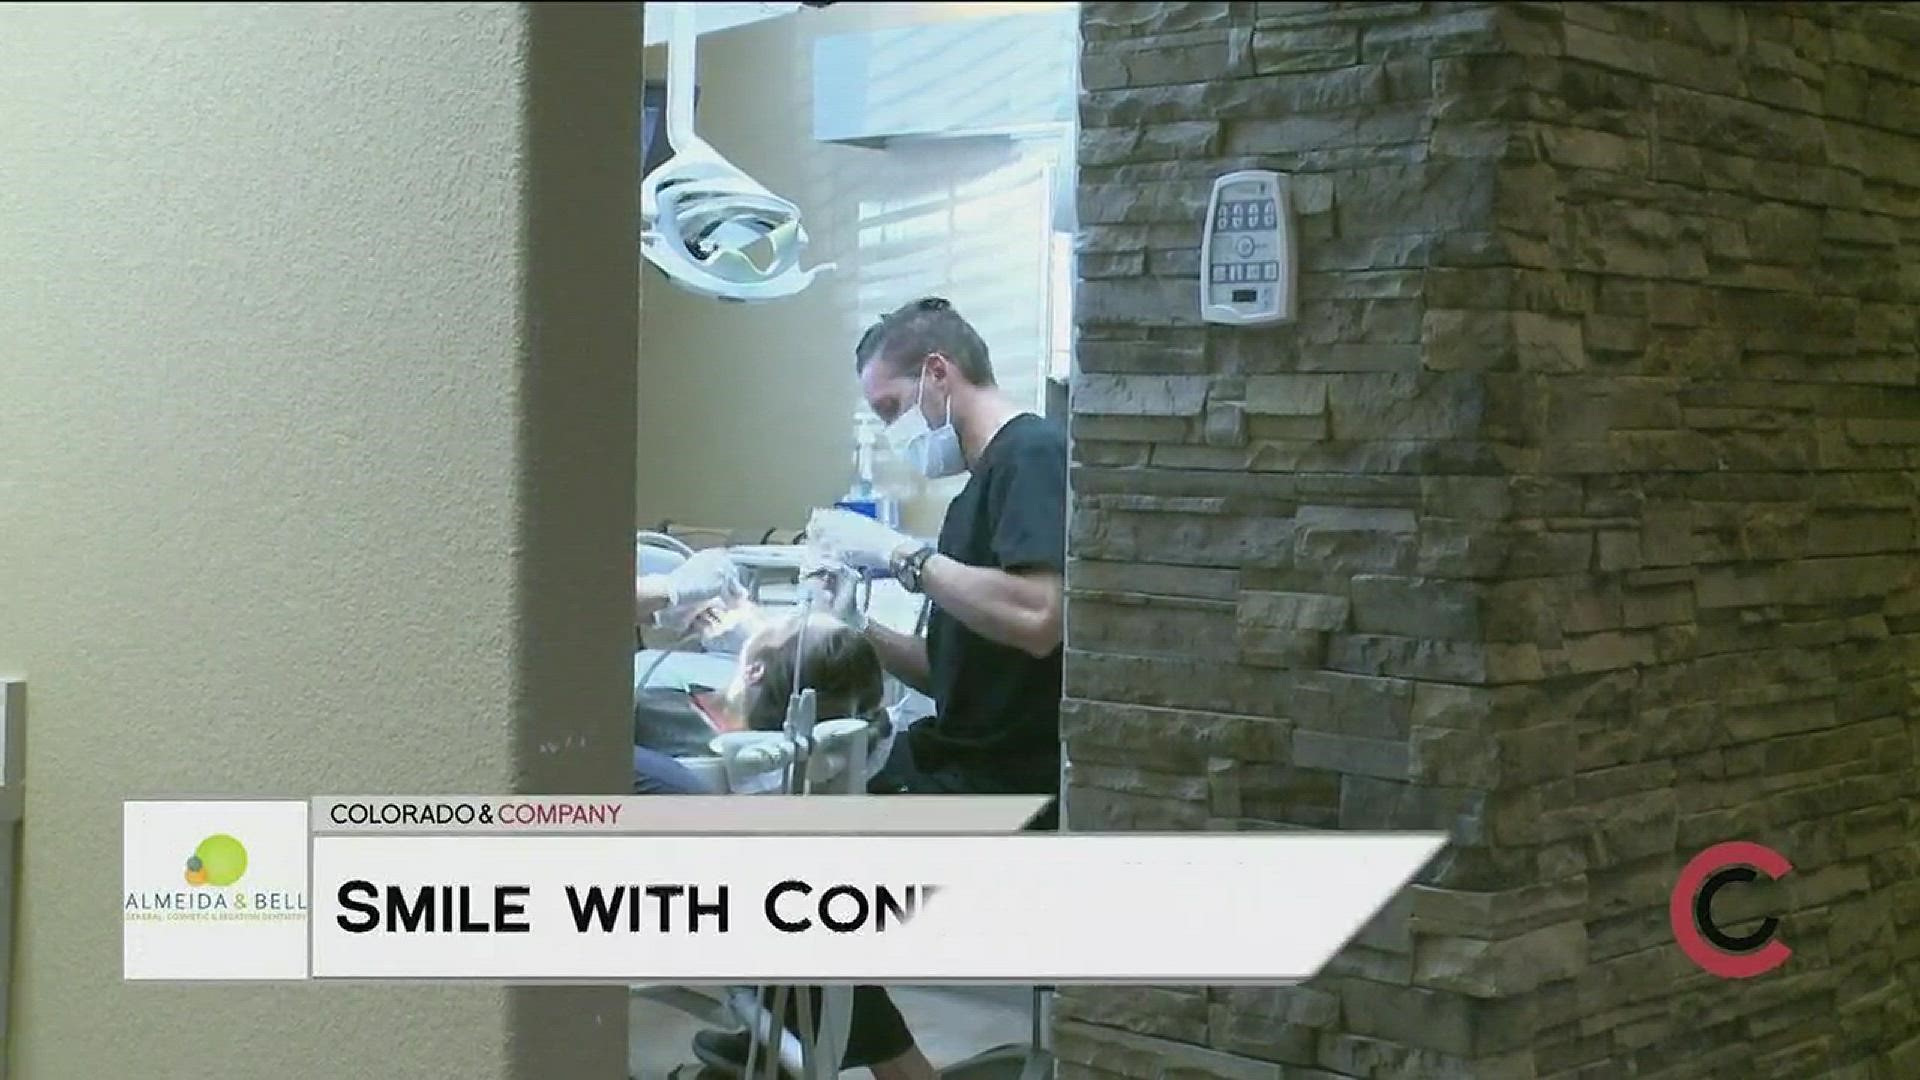 Mention Colorado and Company when you call 303.858.9000 and you'll get 30% off 8 teeth or more when you complete a smile makeover! Most insurances are accepted, except Medicare and Medicaid. Payment options are available. Learn more at www.AlmeidaBellDental.com. THIS INTERVIEW HAS COMMERCIAL CONTENT. PRODUCTS AND SERVICES FEATURED APPEAR AS PAID ADVERTISING.